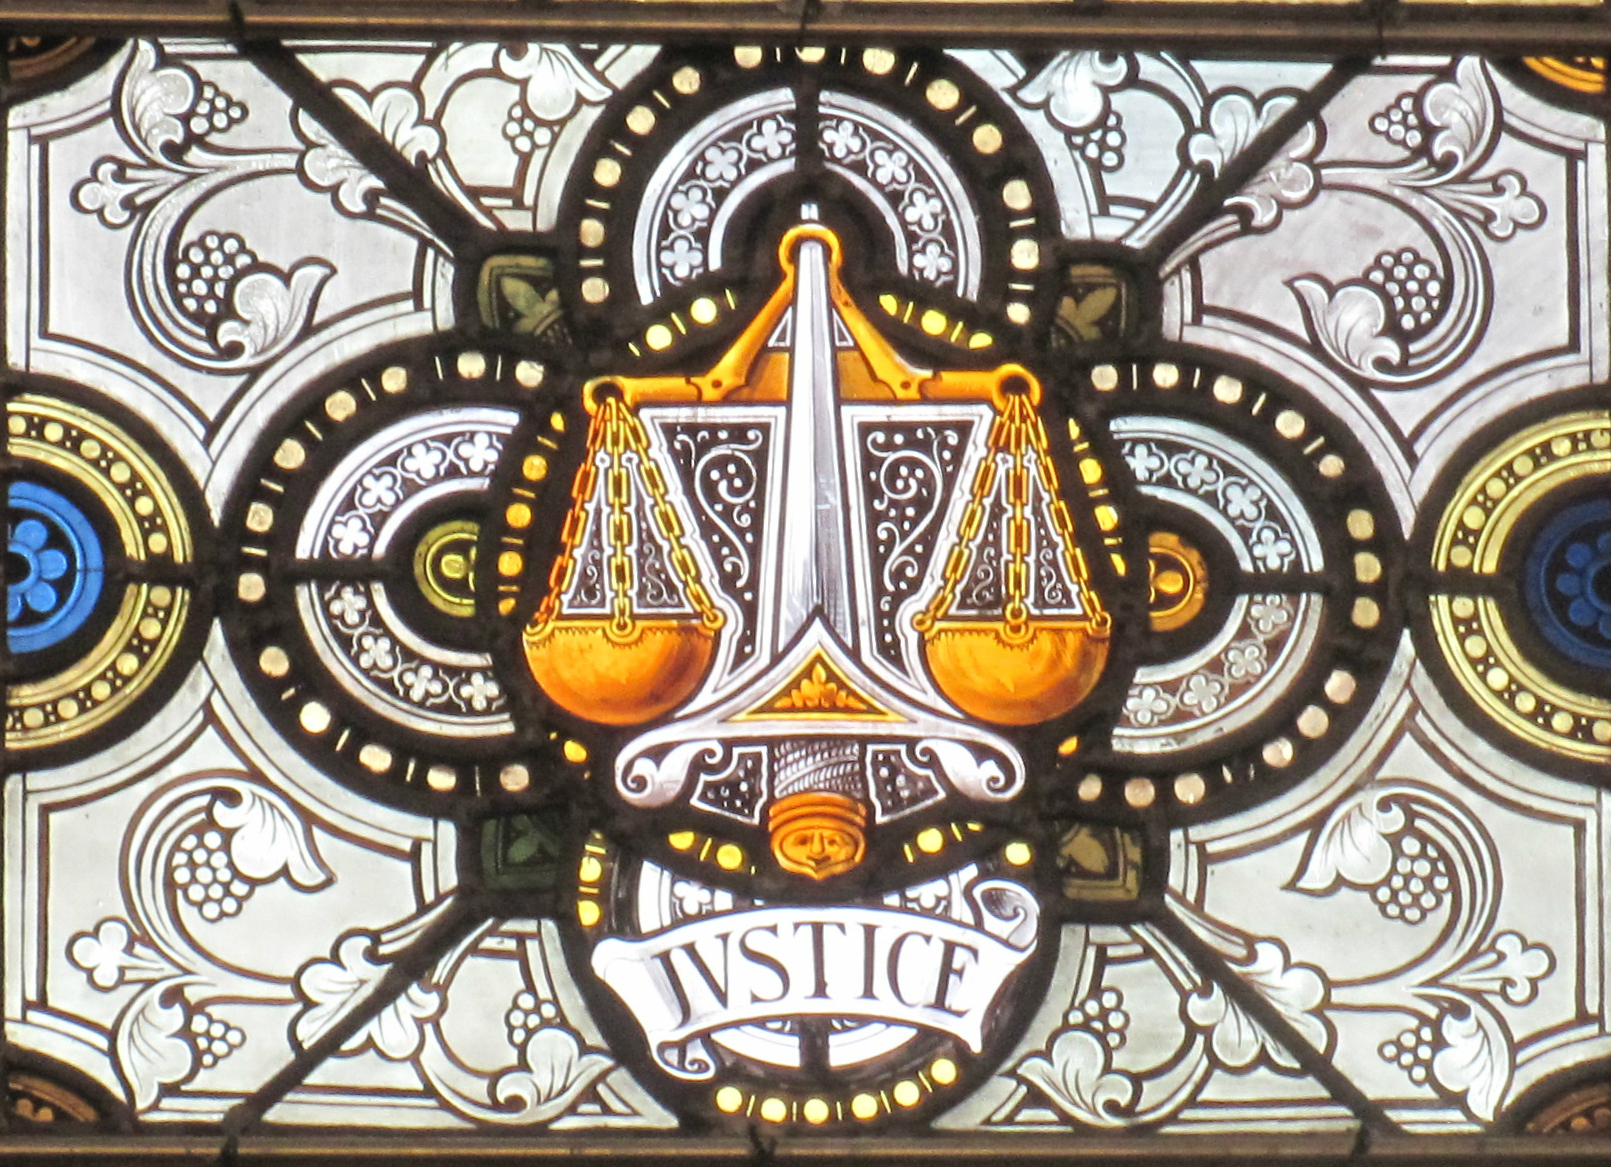 Stained glass window in the Parish Hall of Saint Ouen